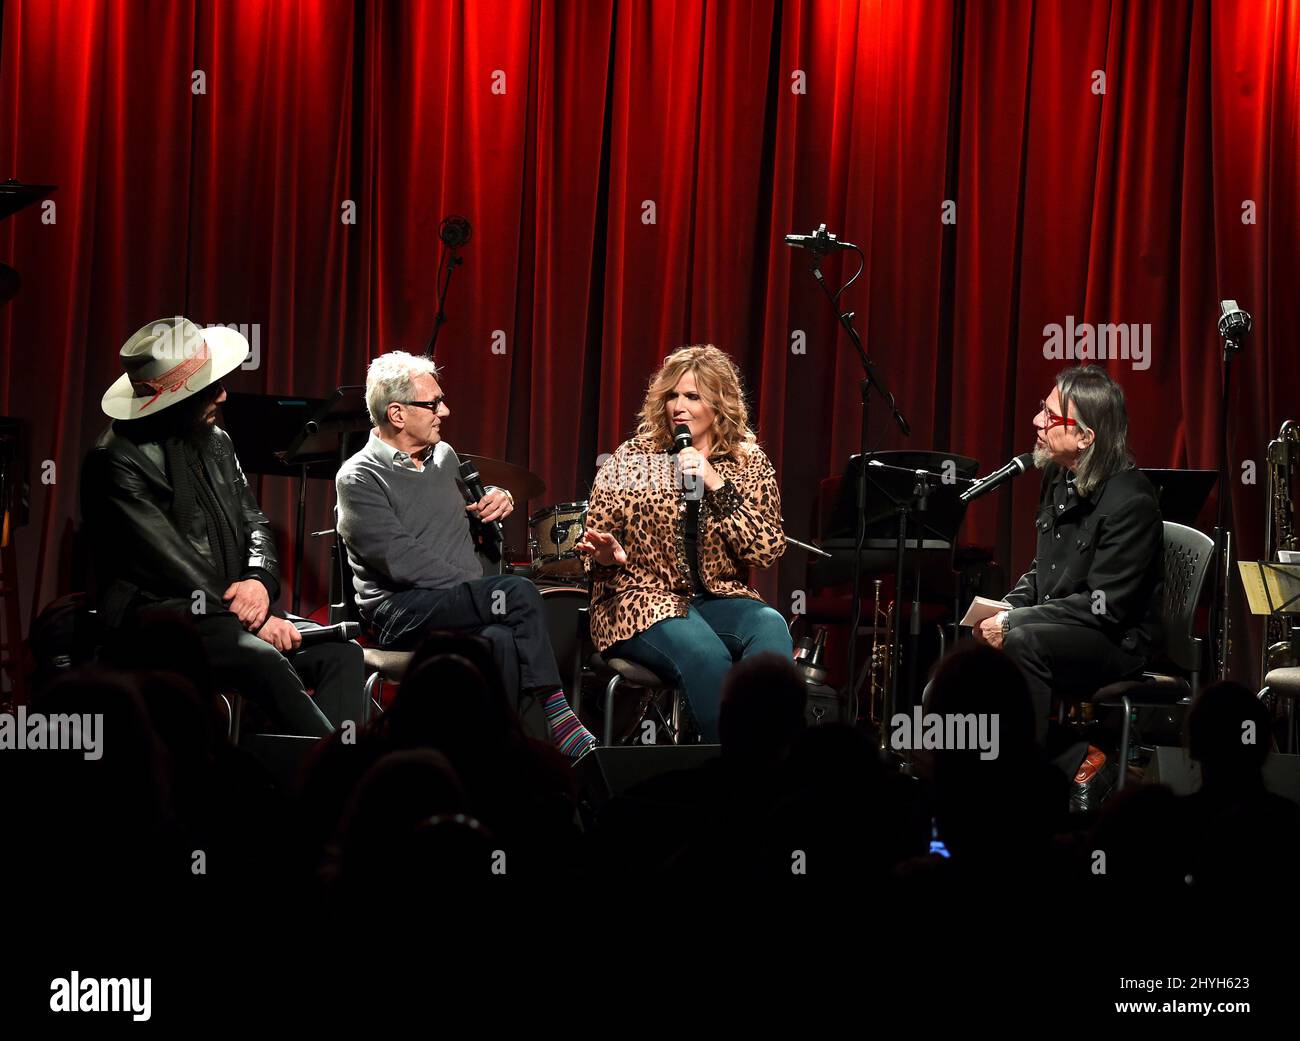 The GRAMMY Museum's series THE DROP presents: Trisha Yearwood to the Clive Davis Theater along with iconic music producer Don Was and engineer Al Schmitt, for an intimate discussion on the making of Trisha's new album, LET'S BE FRANK, a collection of the singer's favourite songs by Frank Sinatra Stock Photo